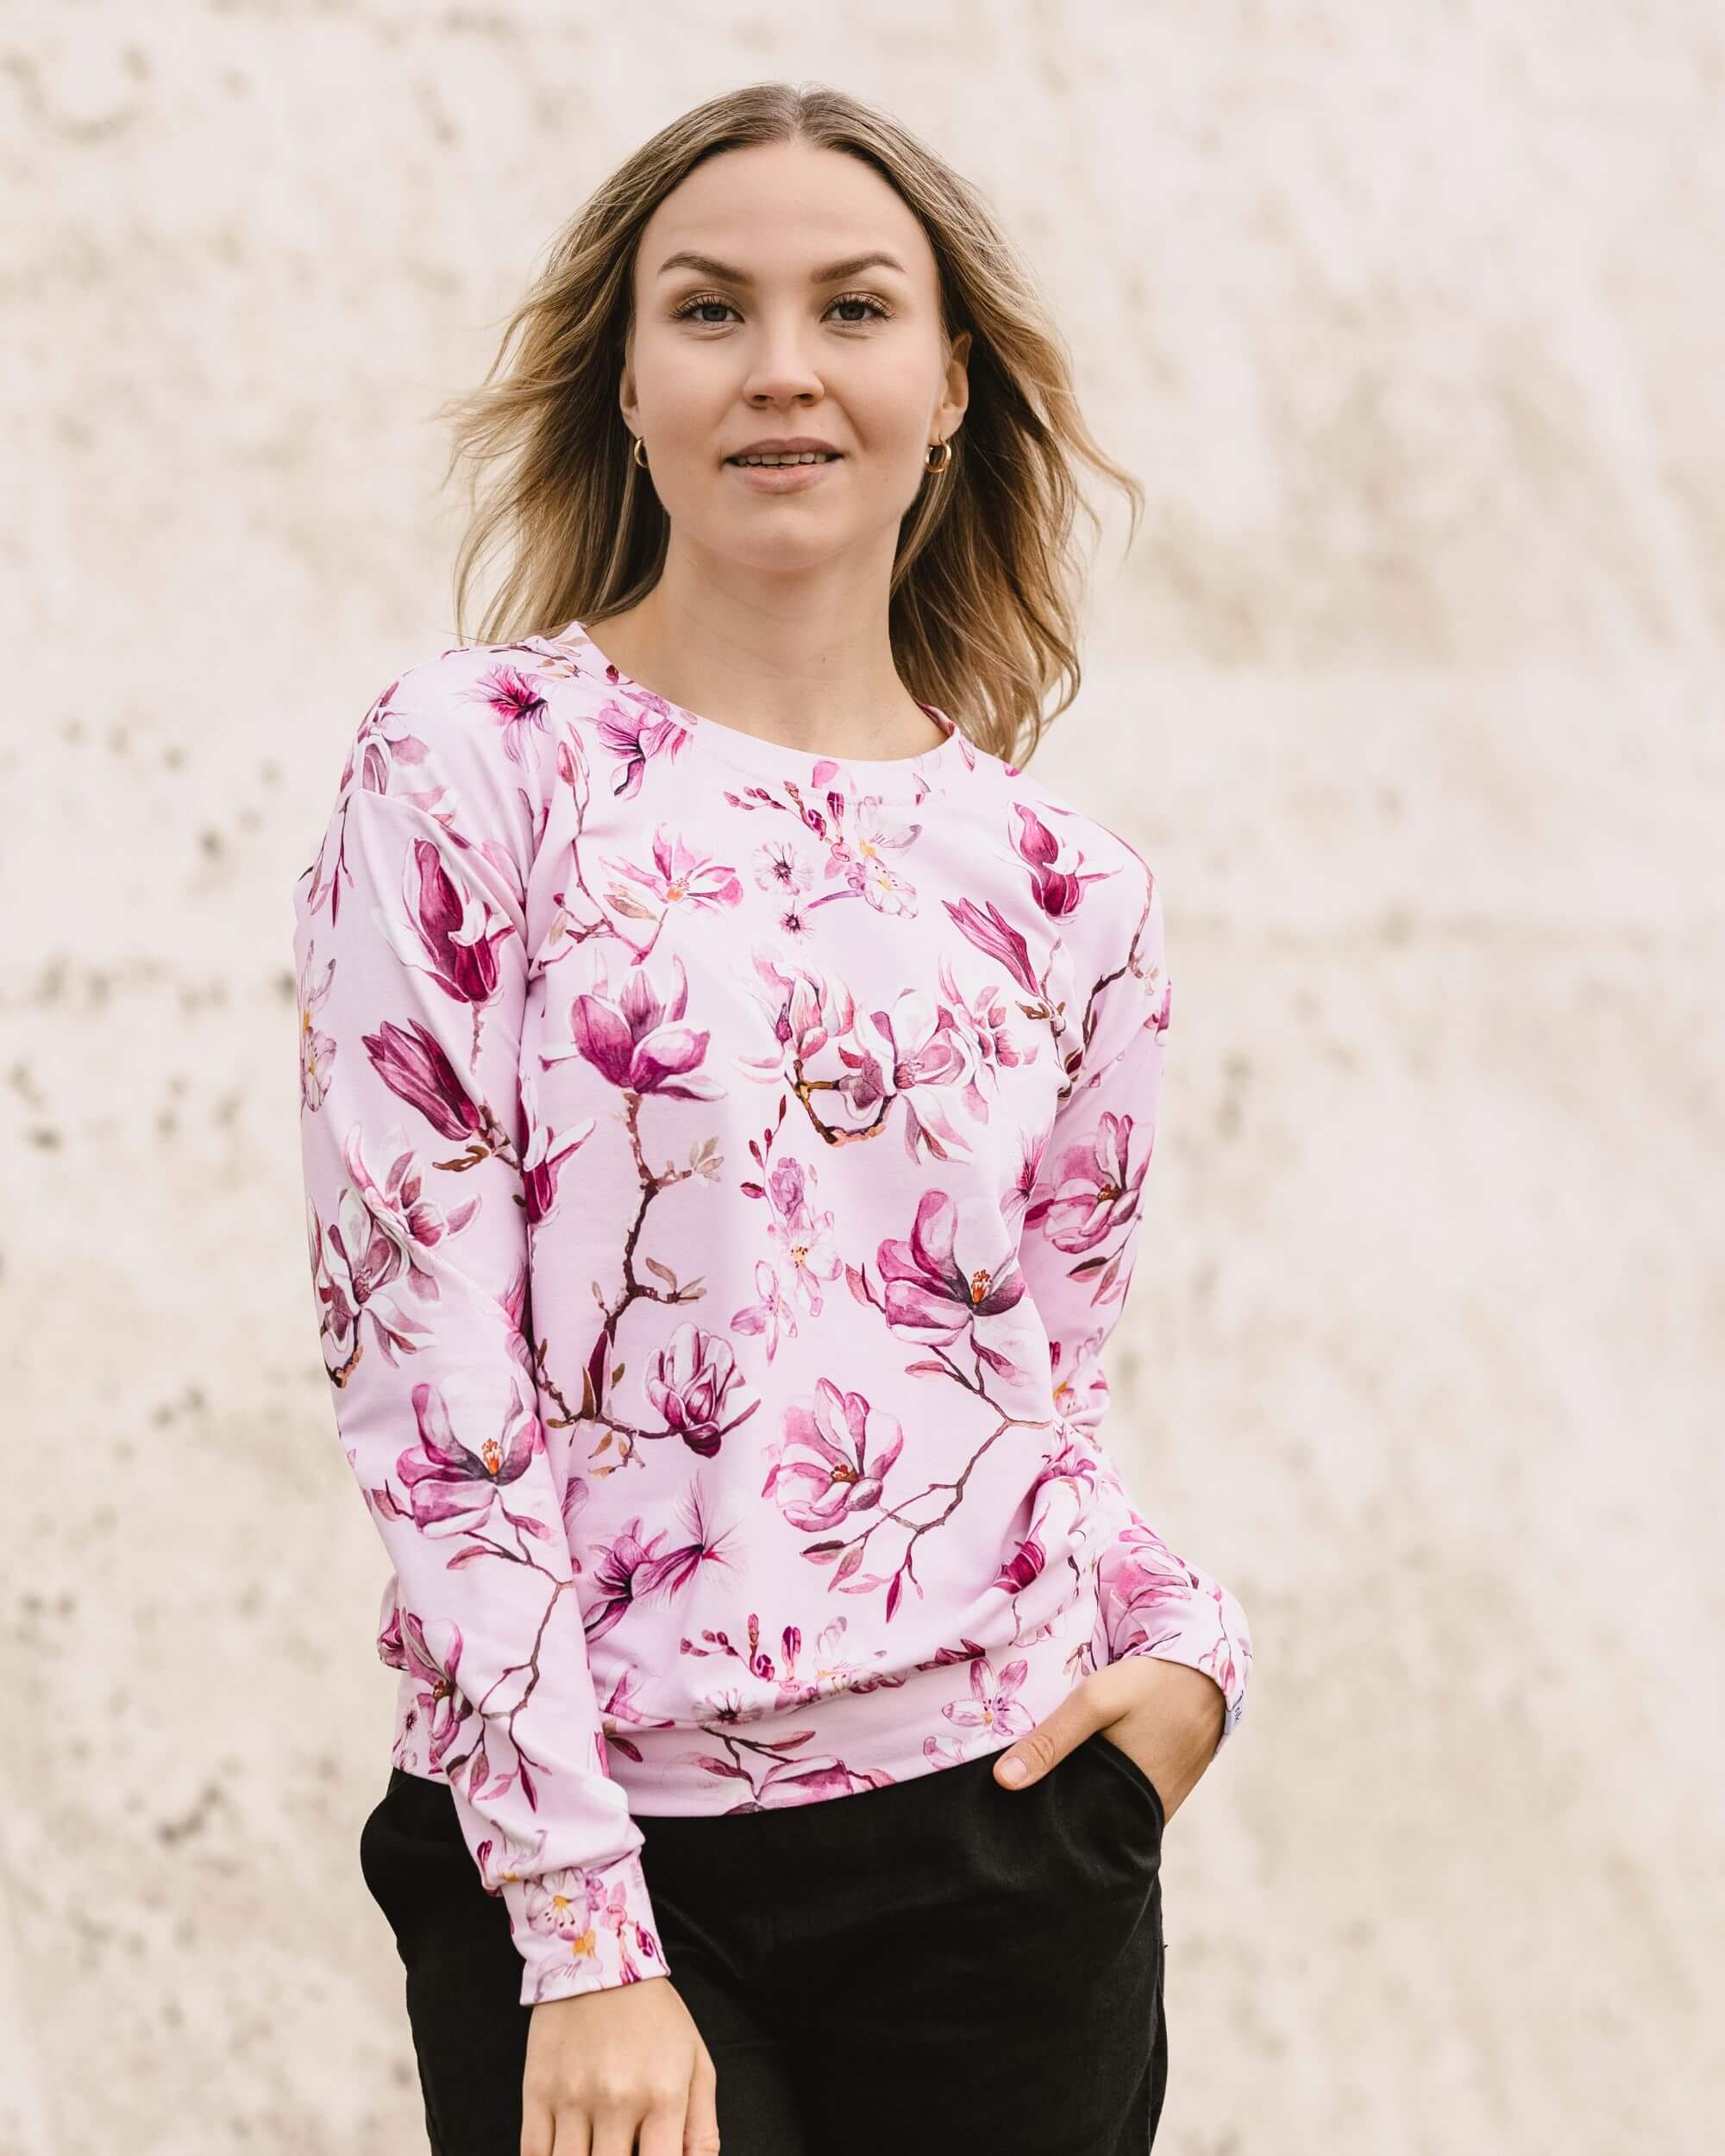 Casual Chic Print Shirt, Ballet of Blossoms